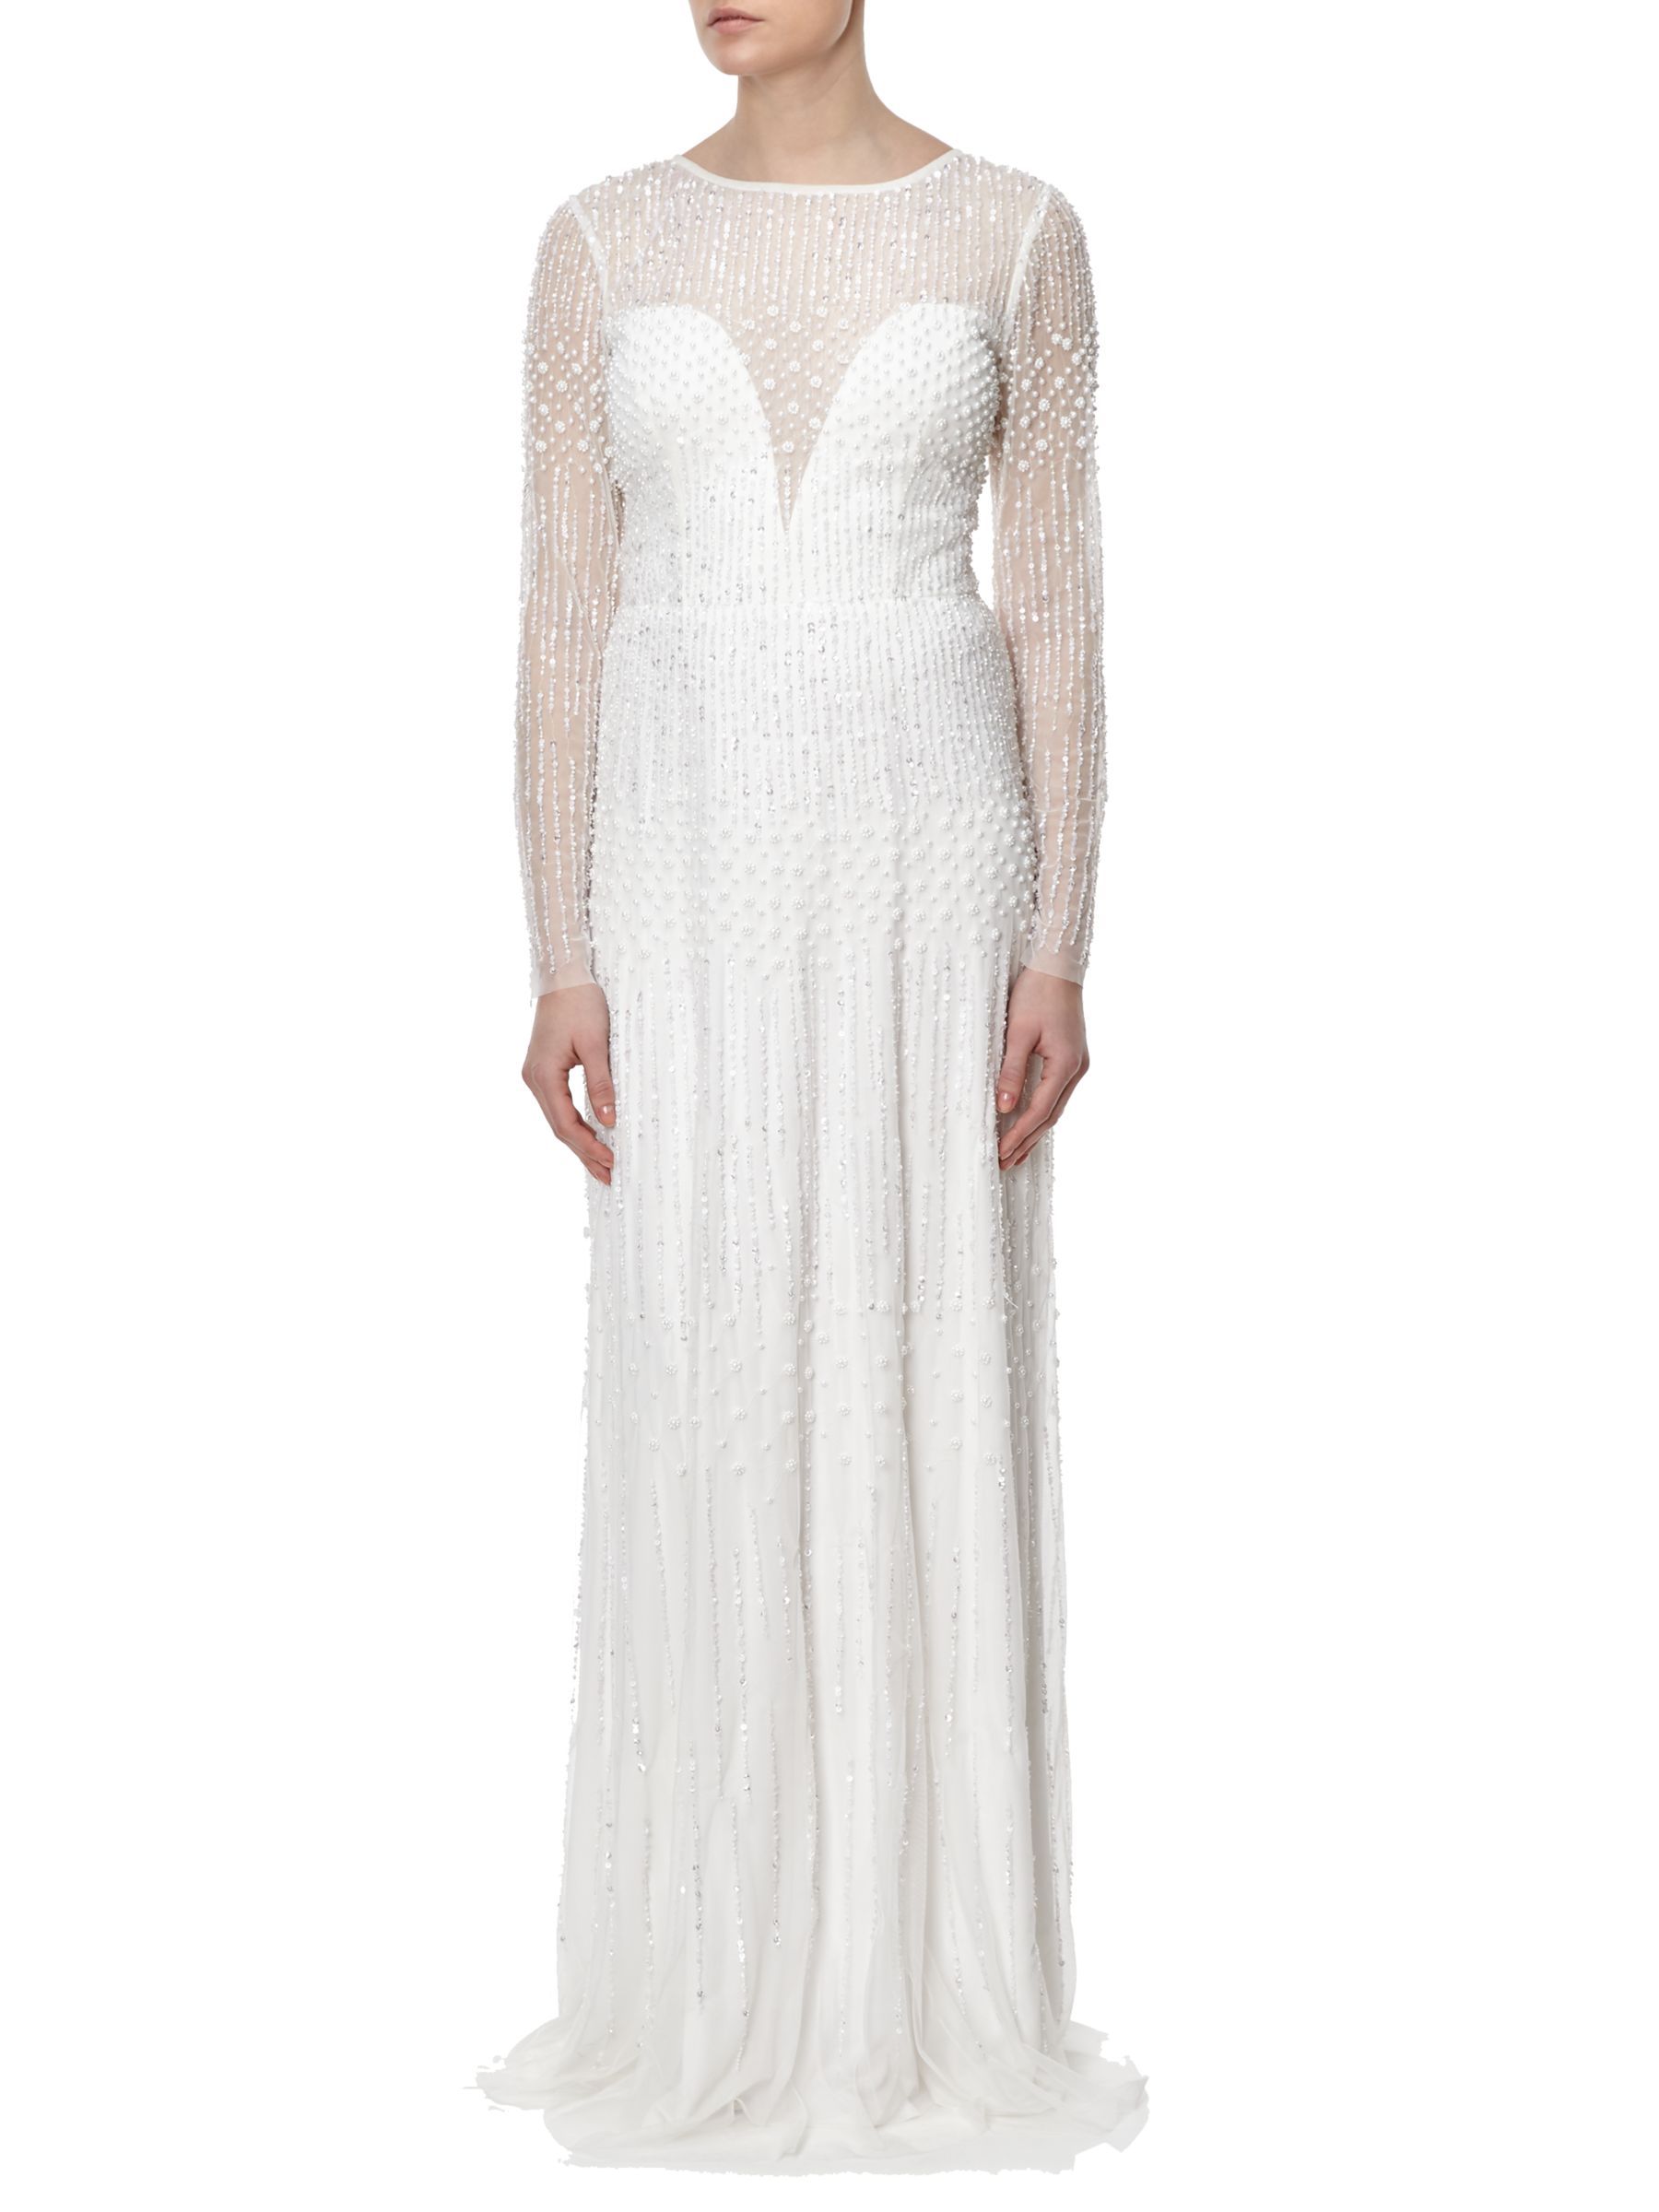 Adrianna Papell Long Sleeve Beaded Gown, Ivory